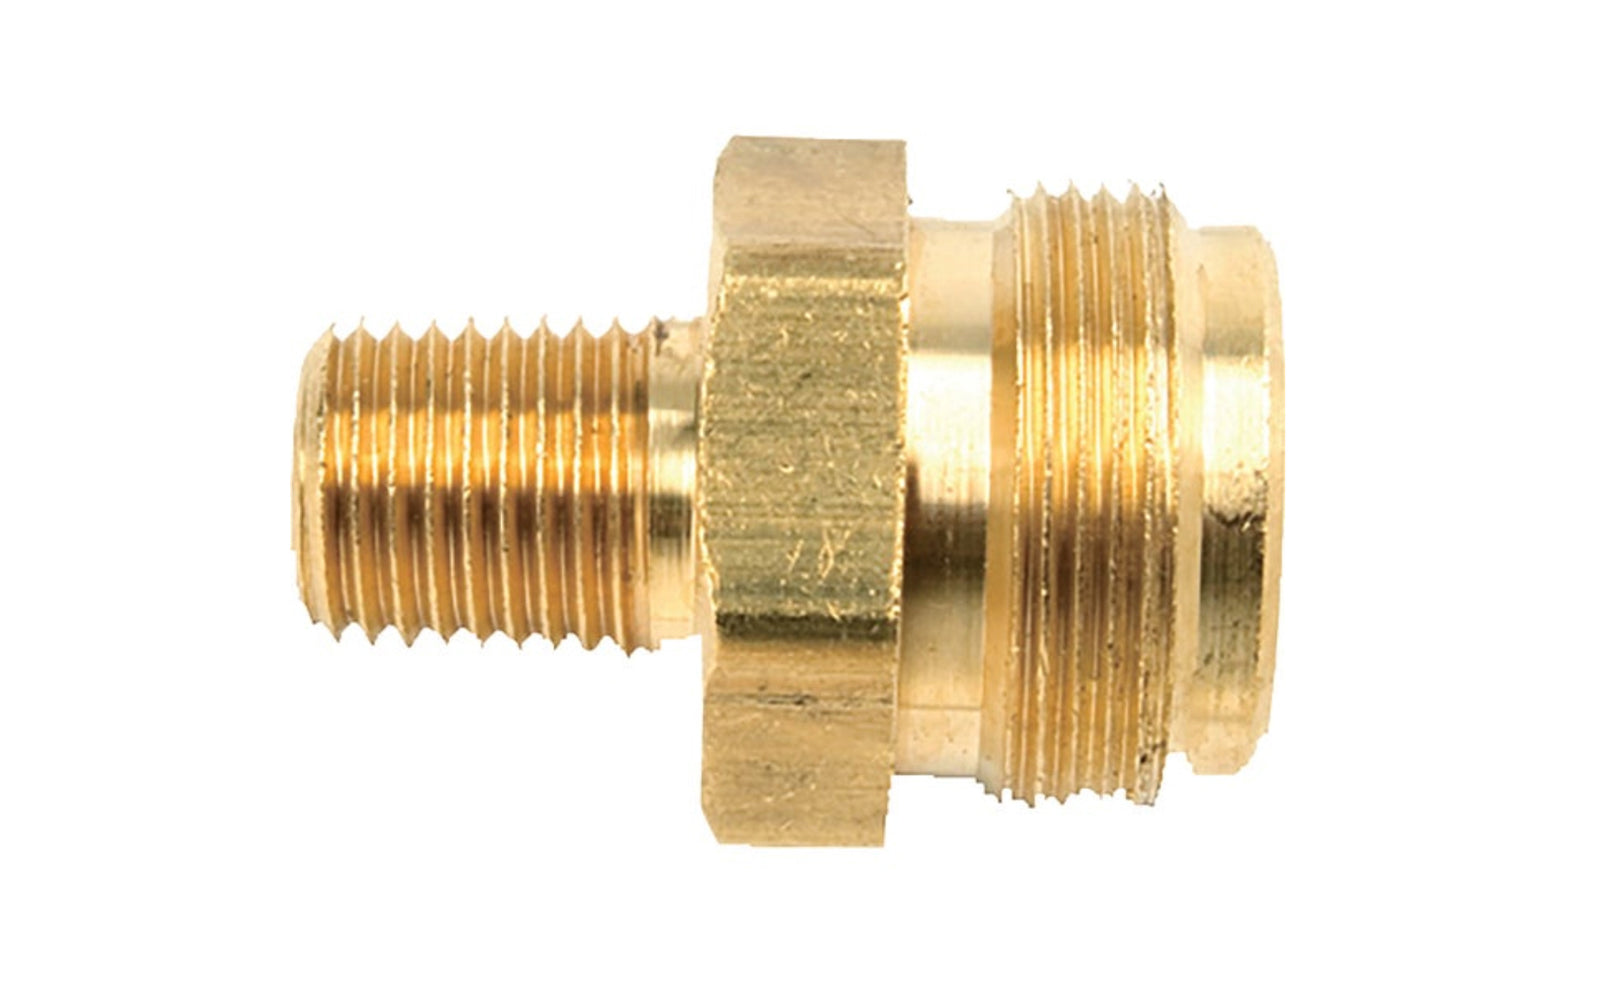 Mr Heater 1"-20 MTCT x 1/4" MPT Brass LP Cylinder Adapter. Propane brass fitting. 1 In.-20 Male throwaway cylinder thread x 1/4 In. Male pipe thread. Model F273755.